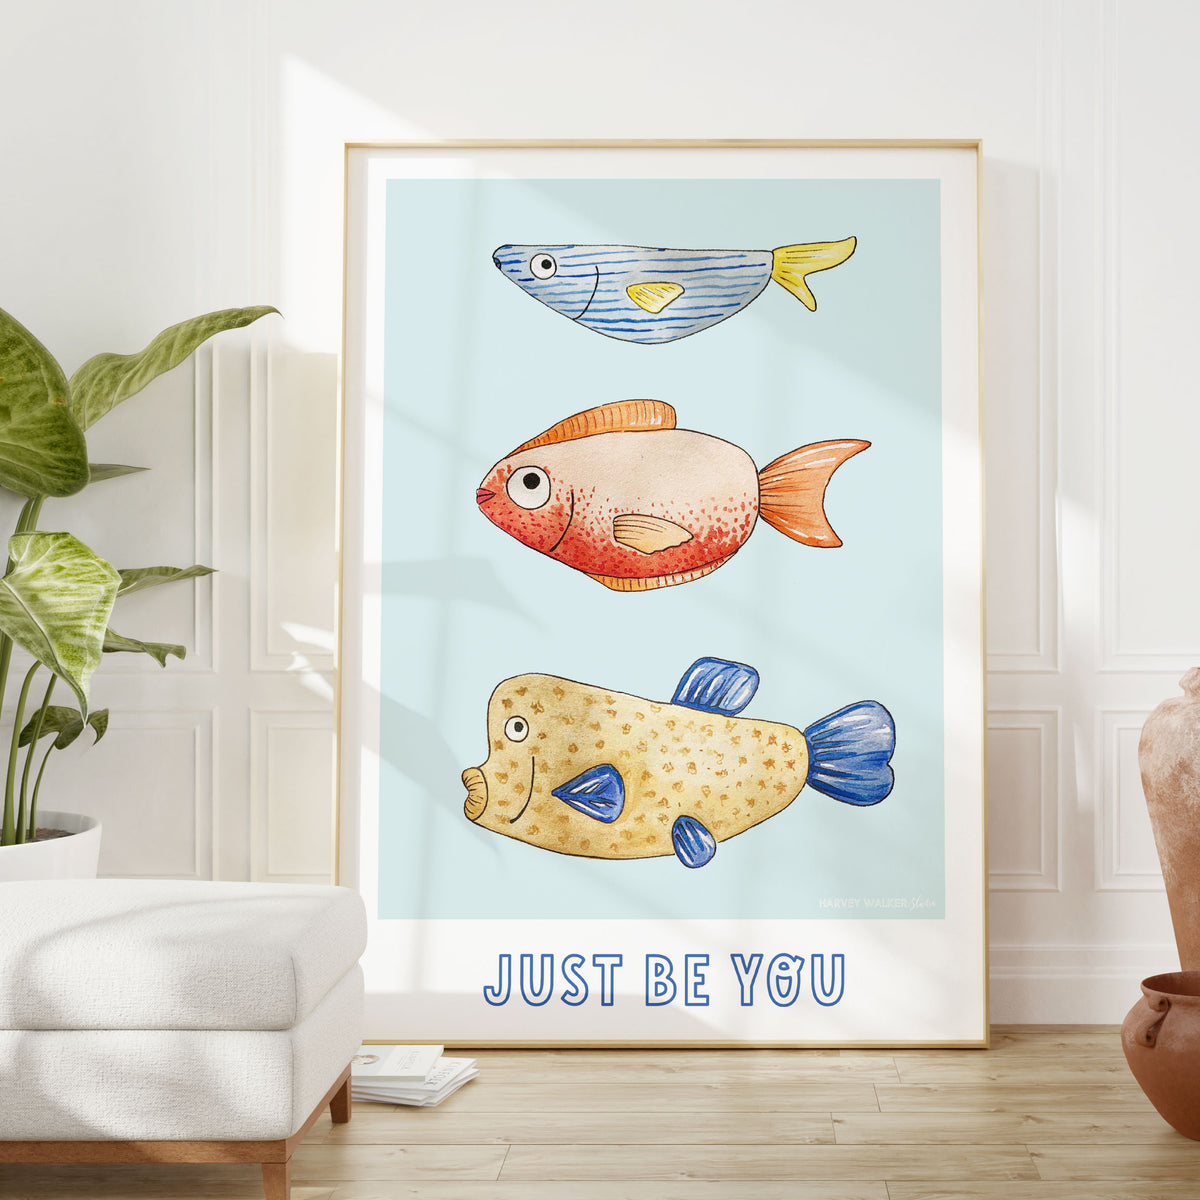 JUST BE YOU - Fine Art Print